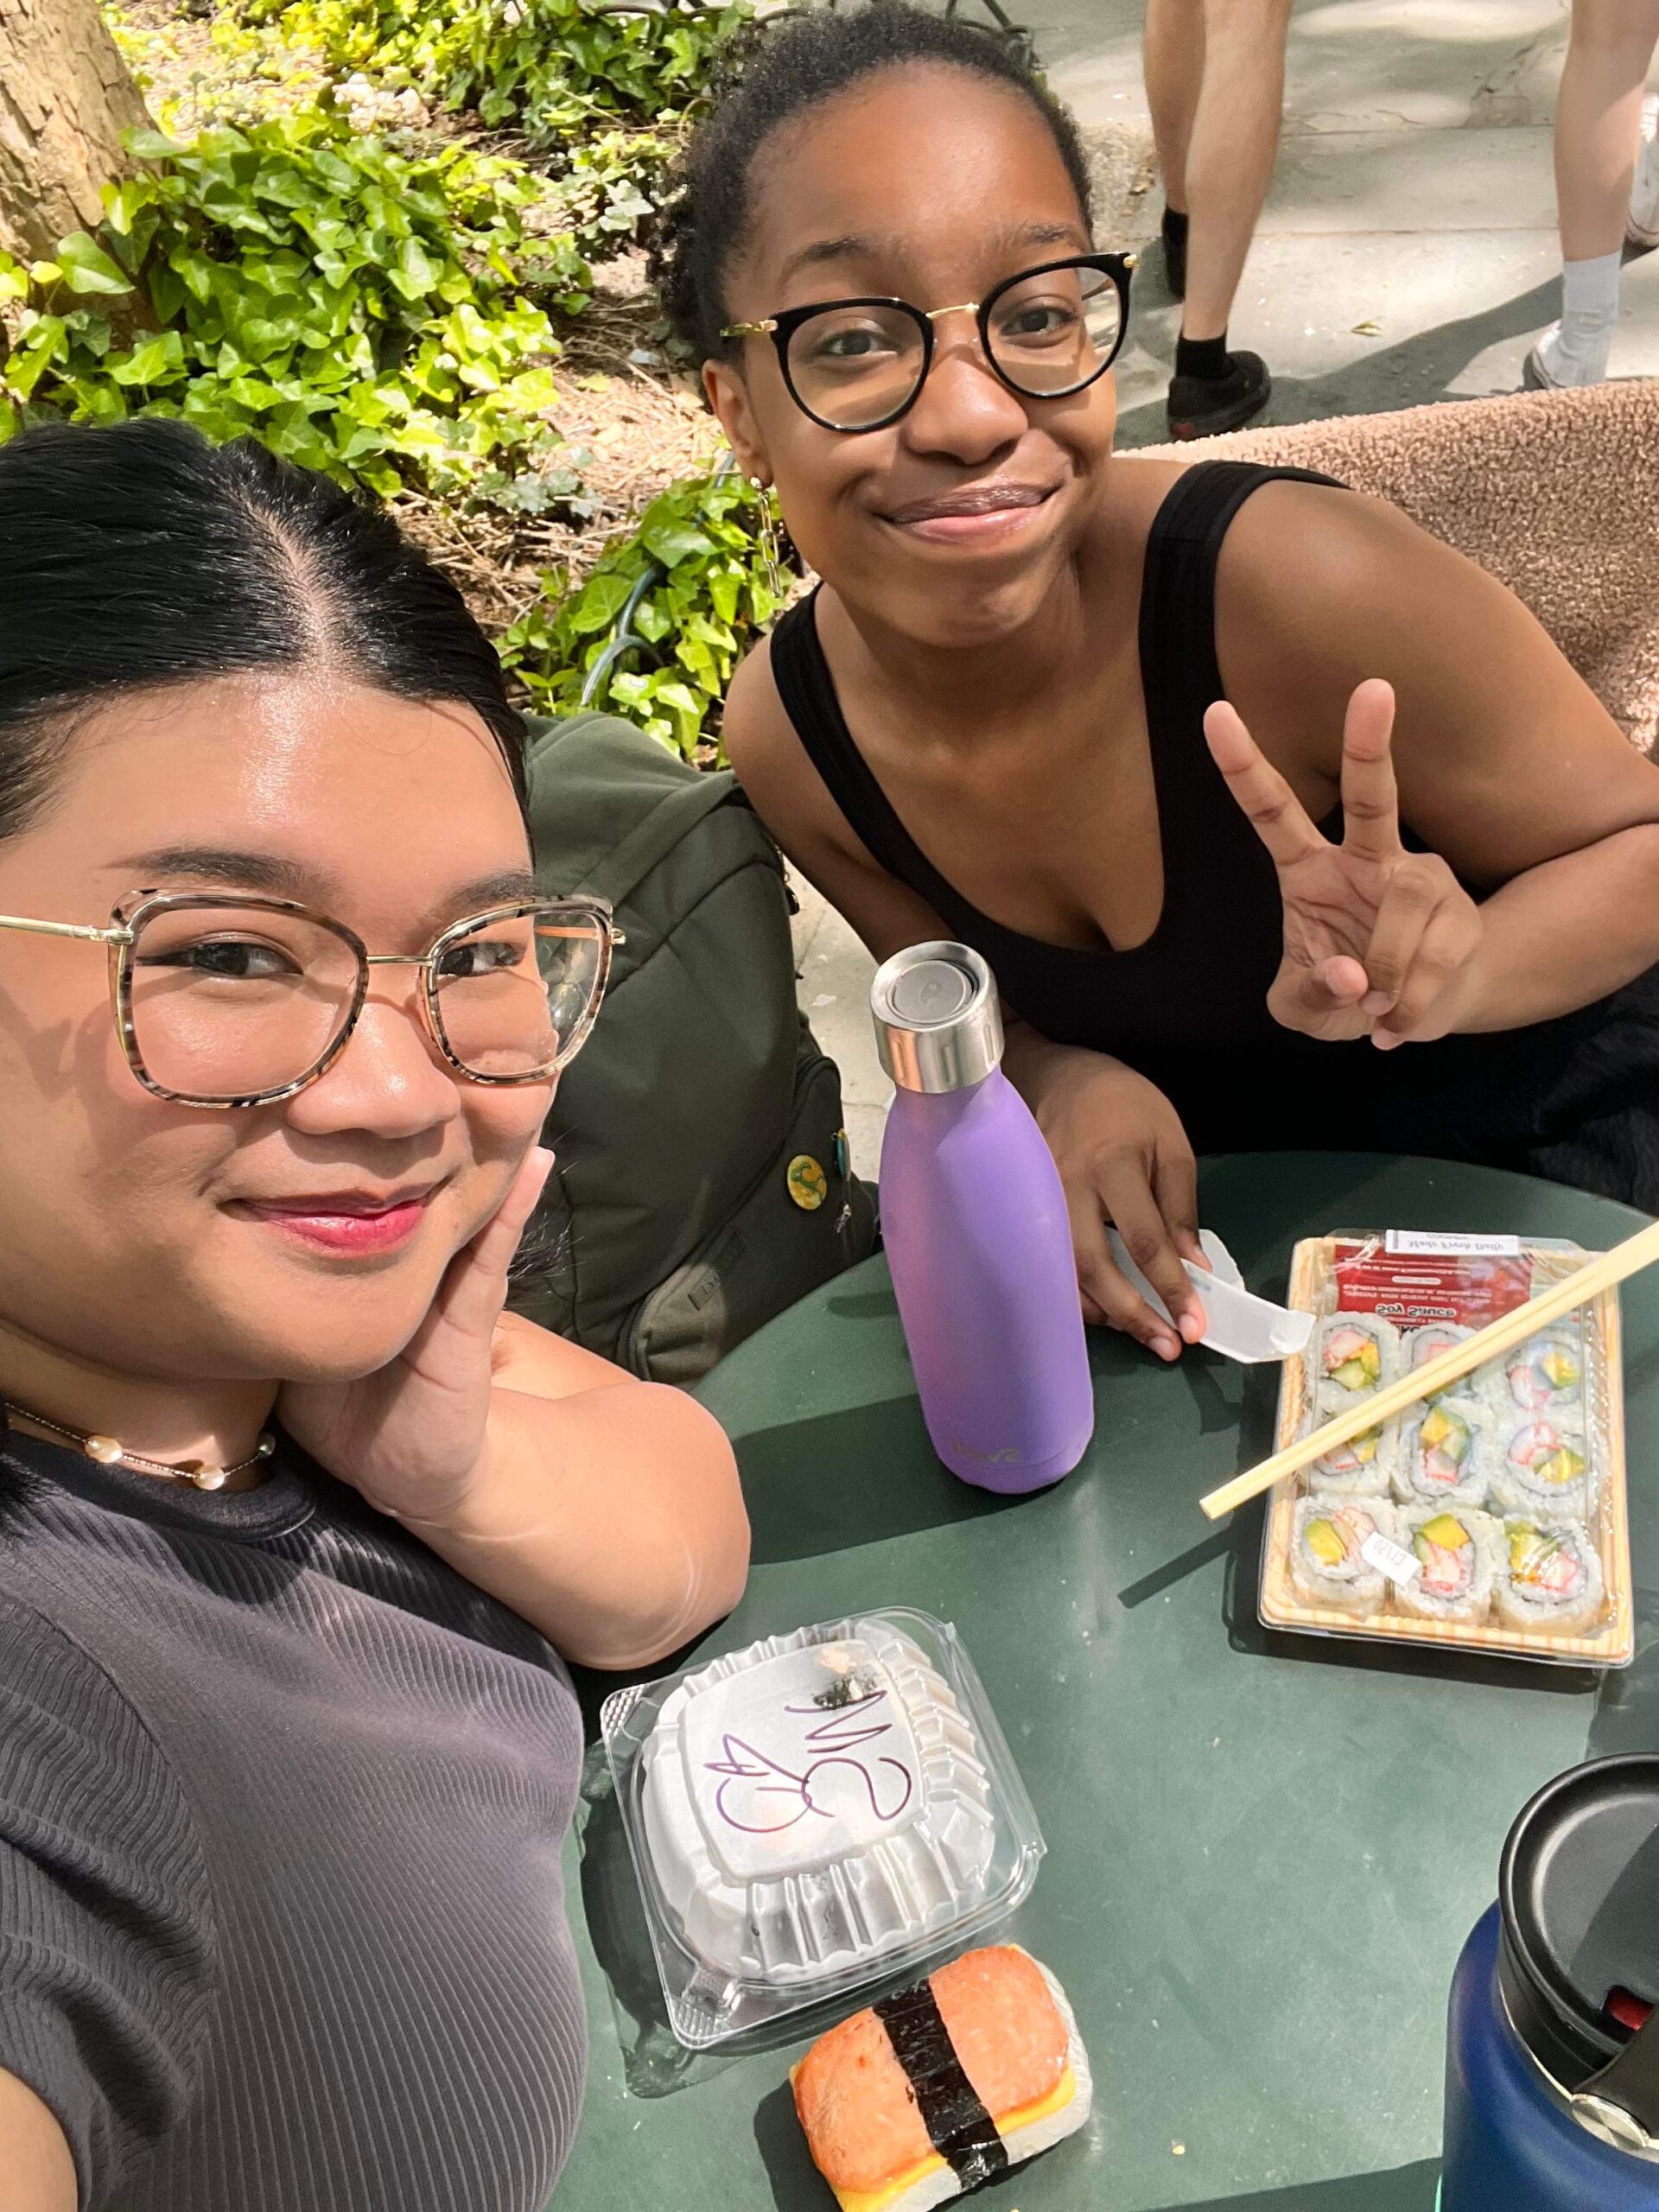 Two women of color eating sushi at a table in a New York City park.